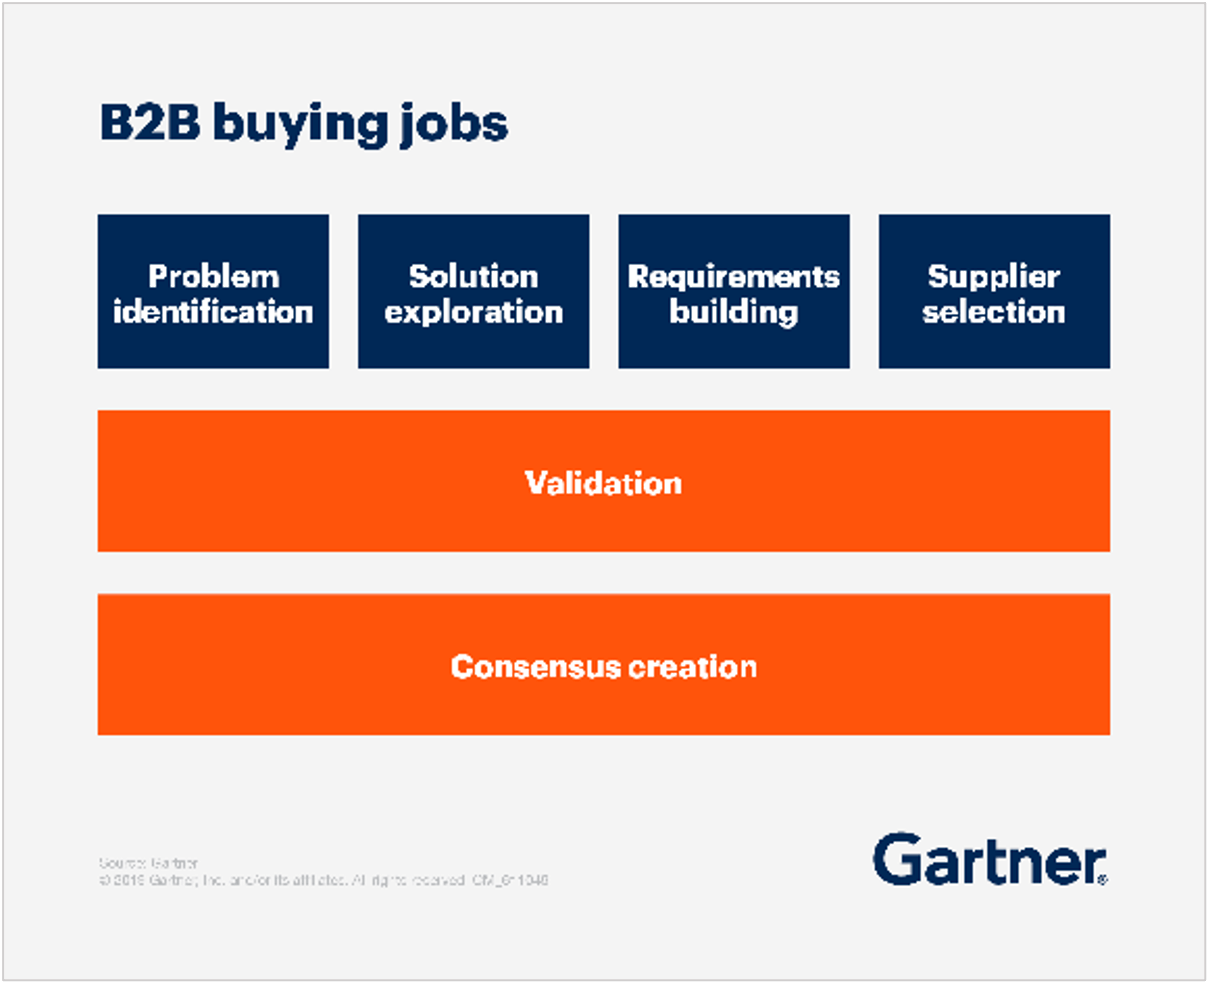 B2B buying jobs as reported by Gartner